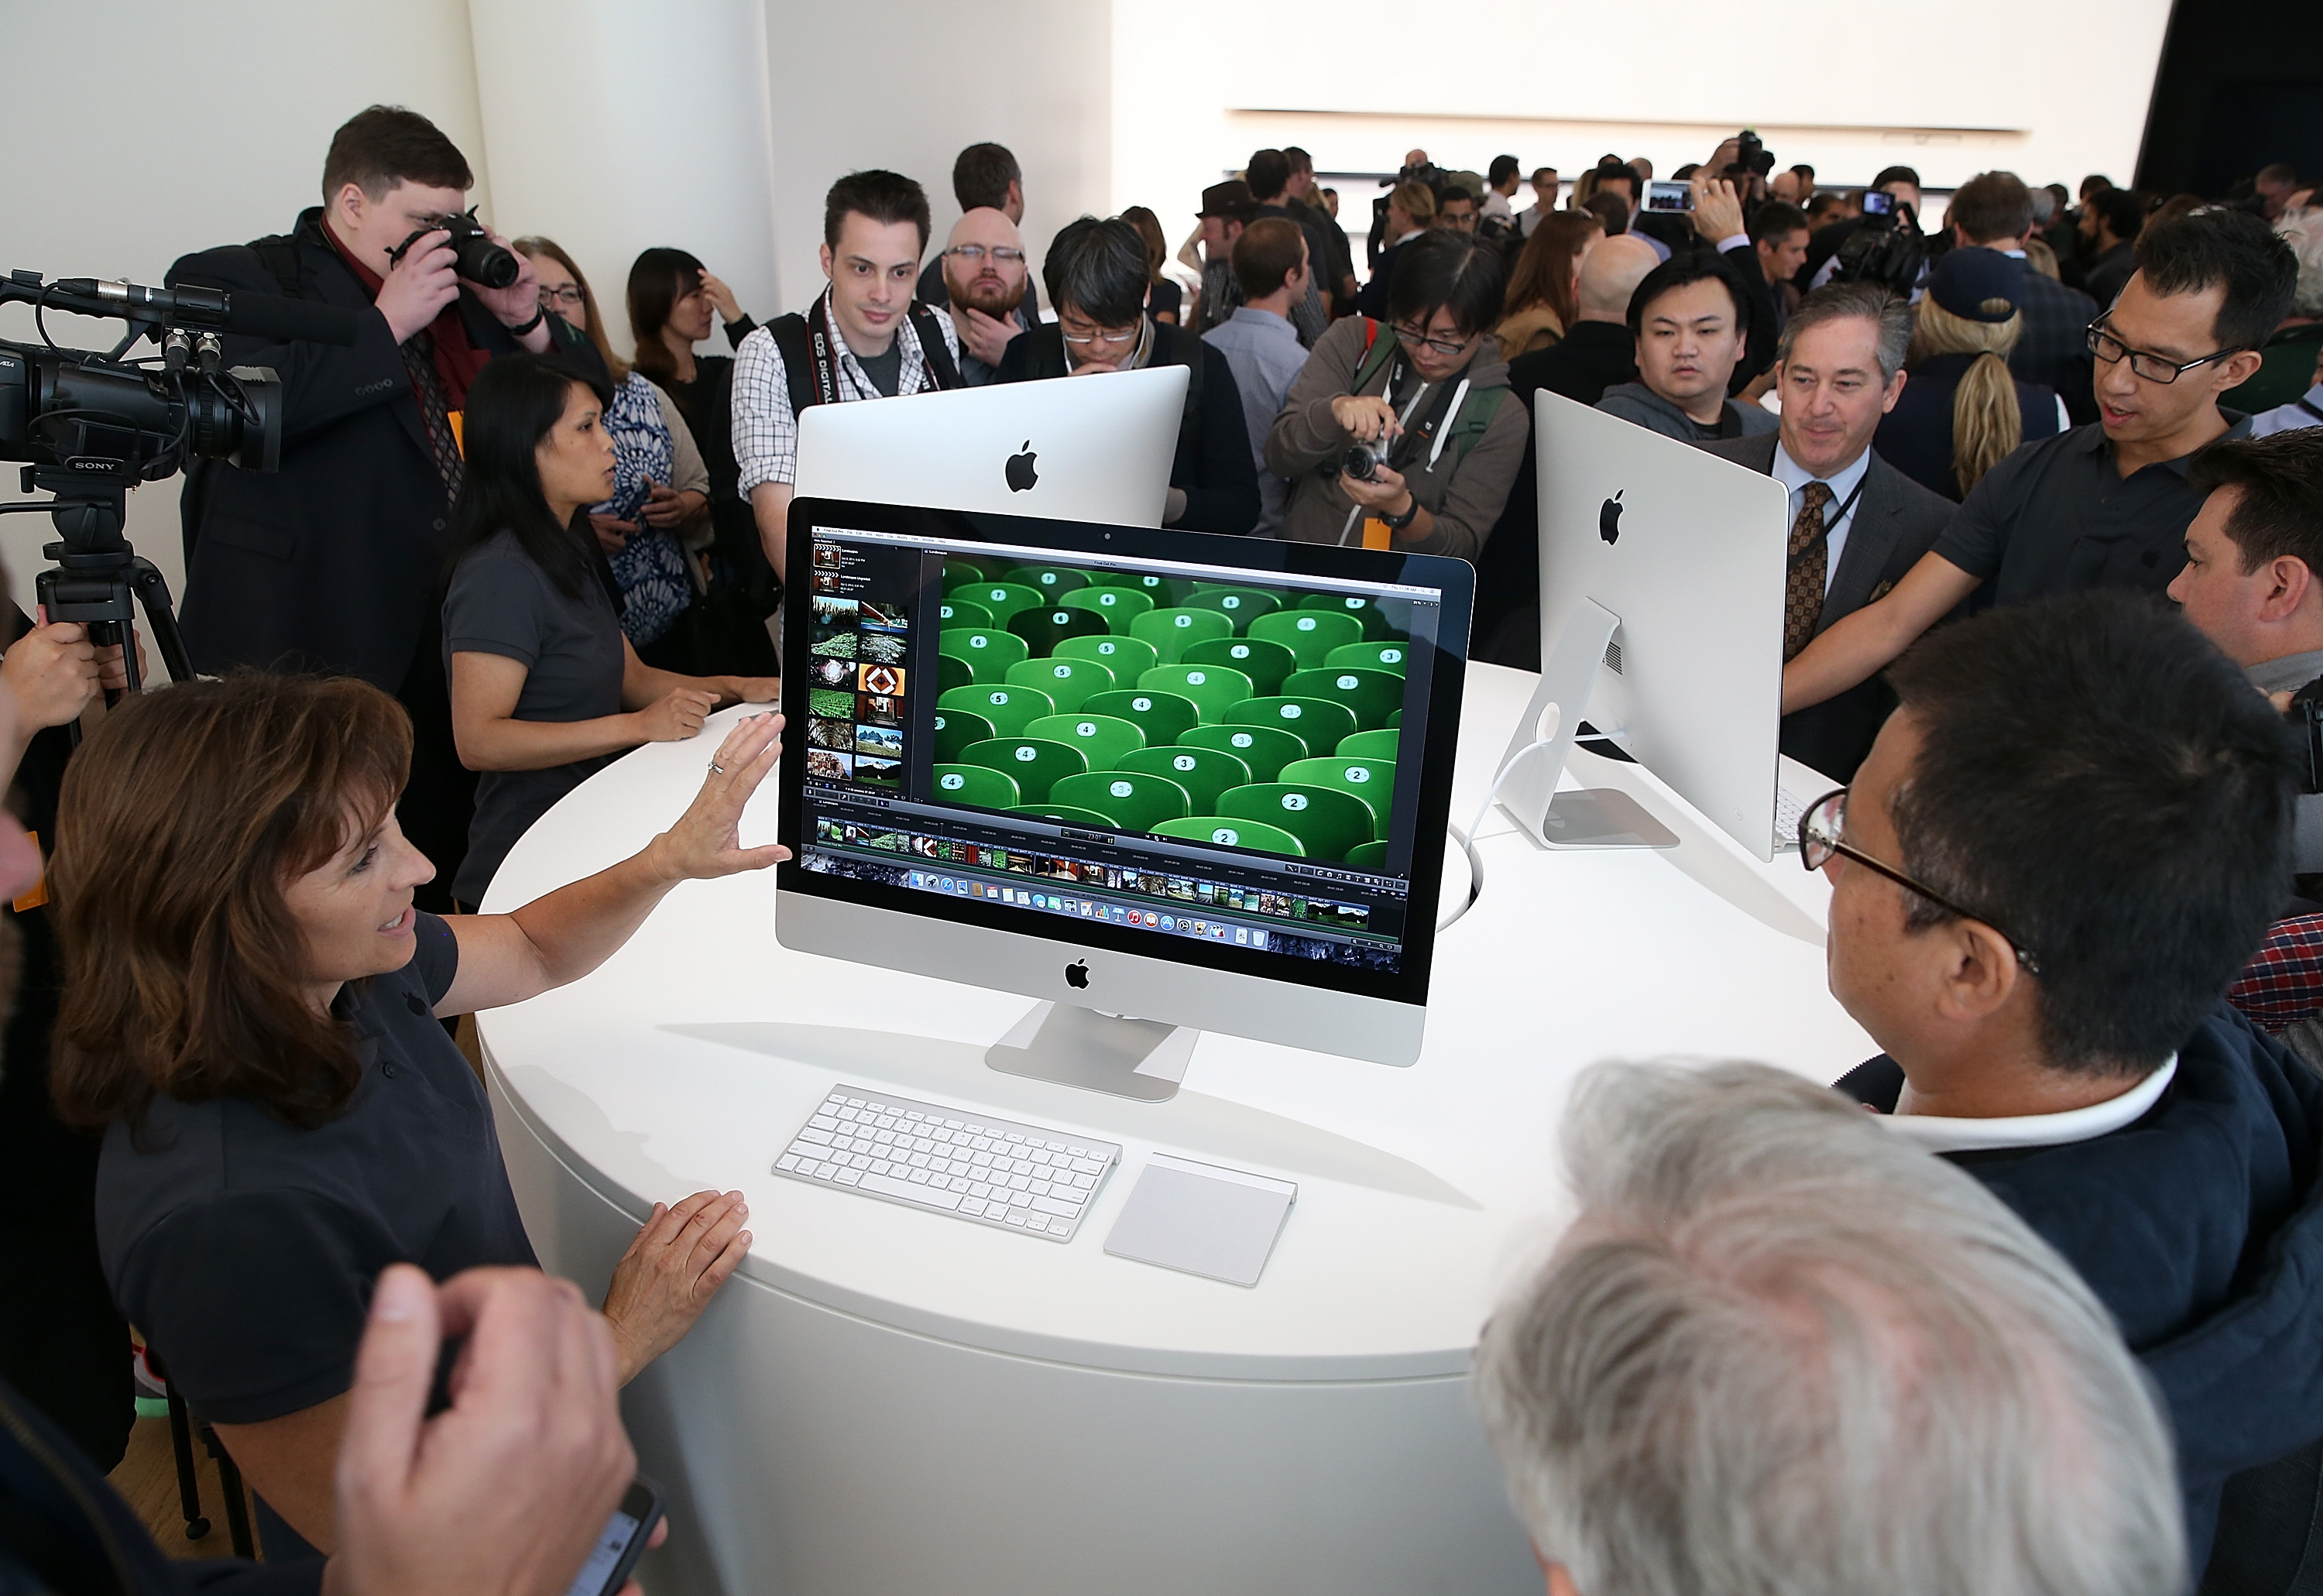 Attendees inspect the new 27 inch iMac with 5K Retina display during an Apple special event on October 16, 2014 in Cupertino, California. (Justin Sullivan&mdash;Getty Images)